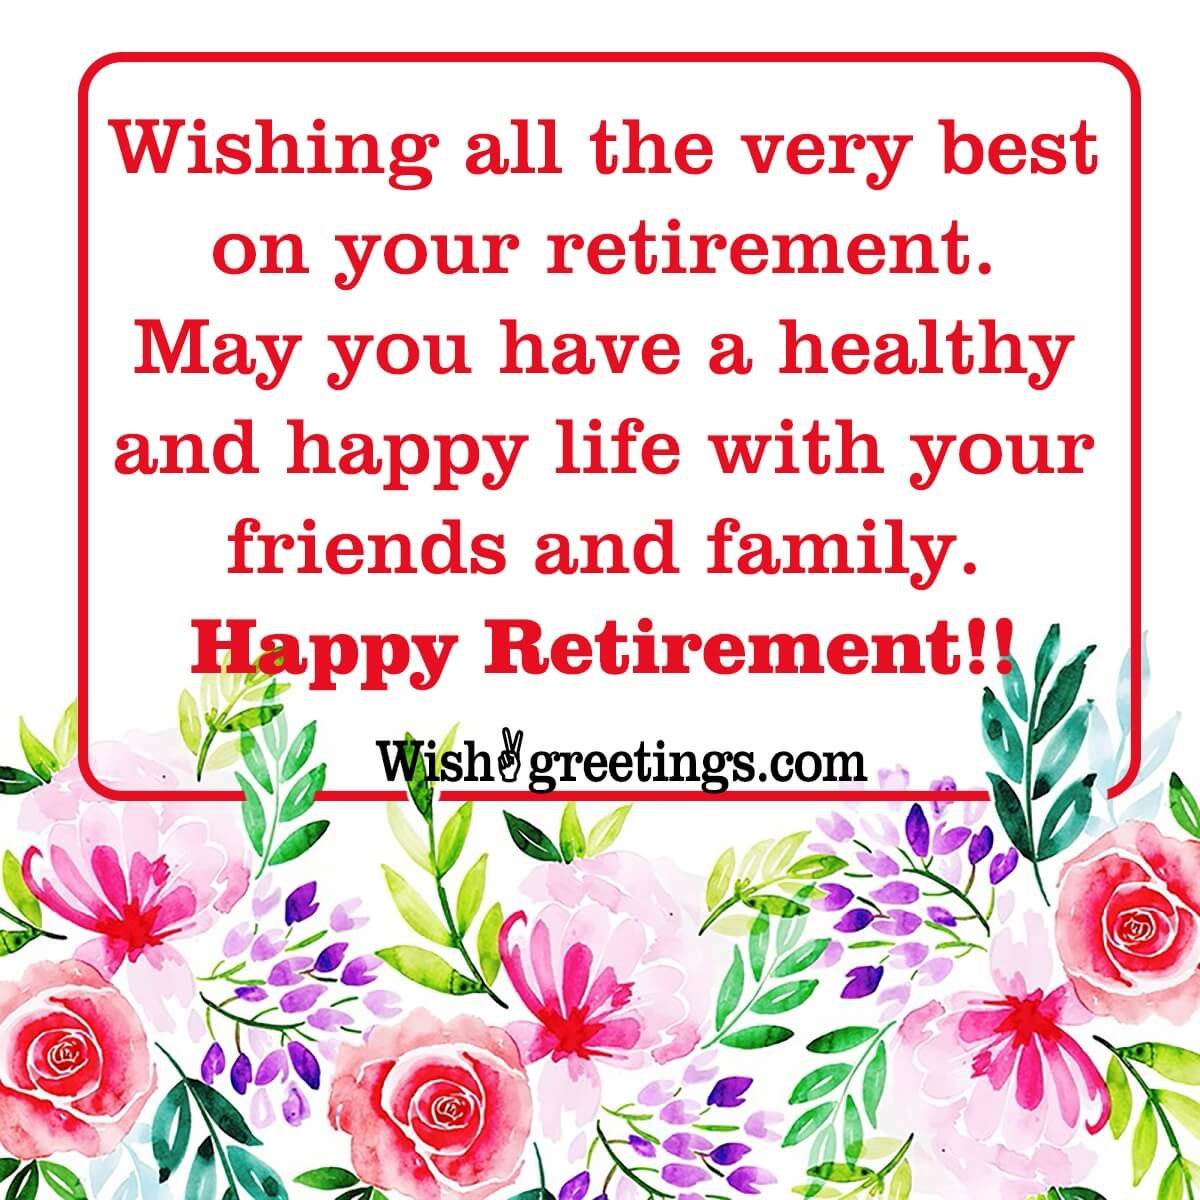 Happy Retirement Wishes Images - Wish Greetings